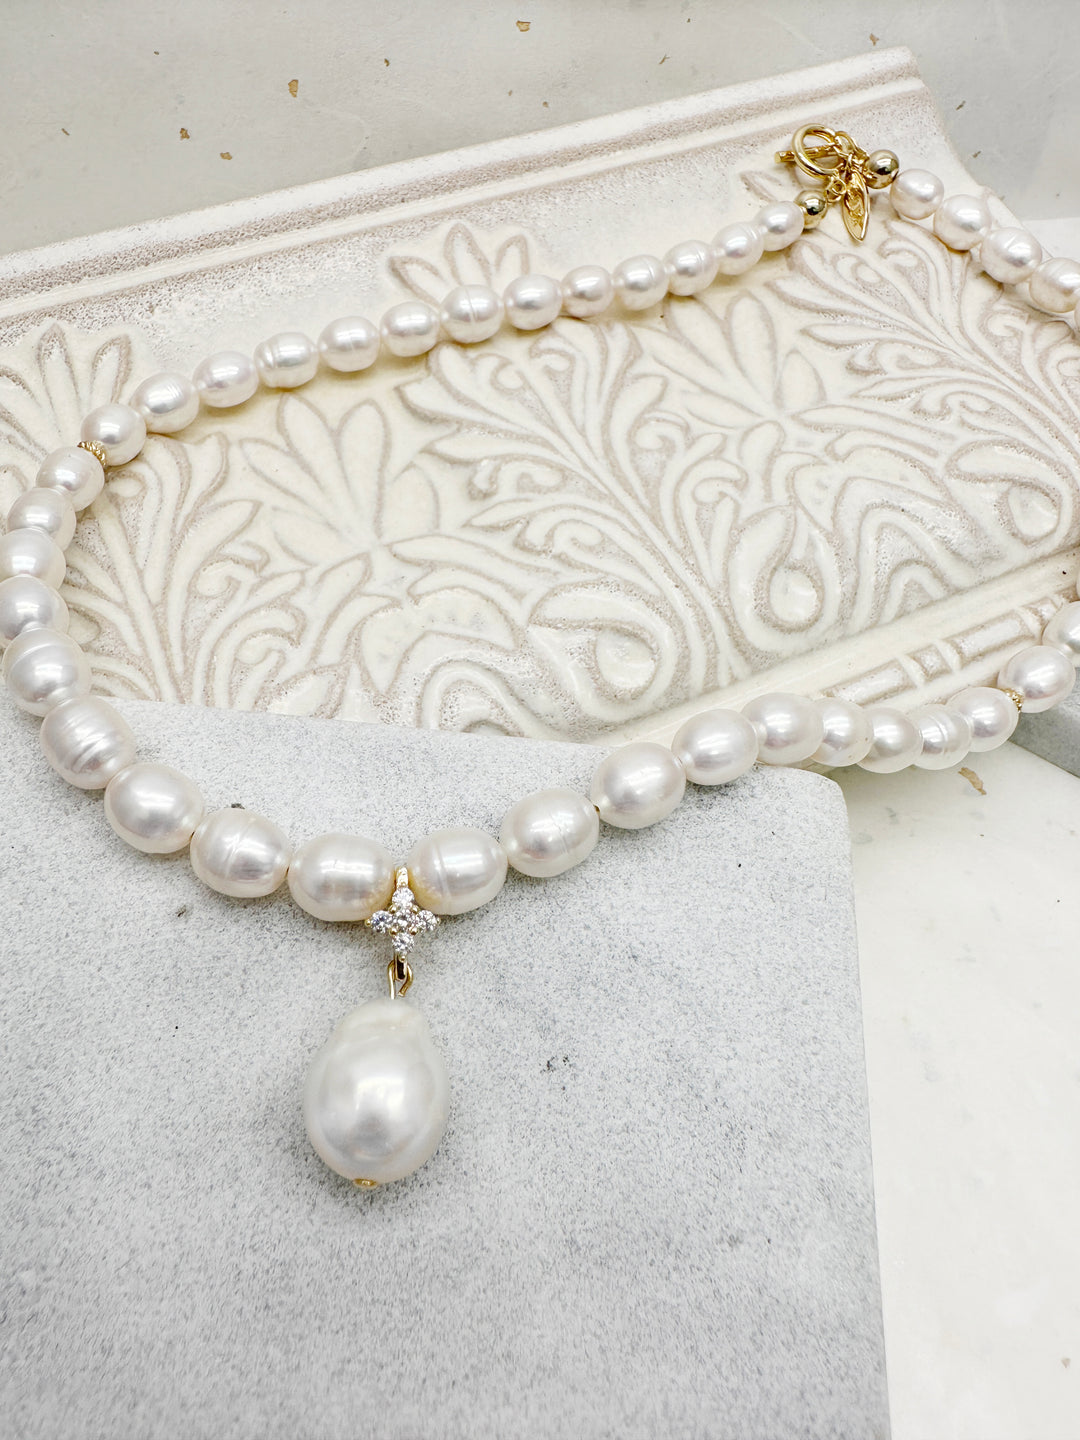 Must-have Freshwater Pearls with Baroque Pearl Pendant Necklace LN063